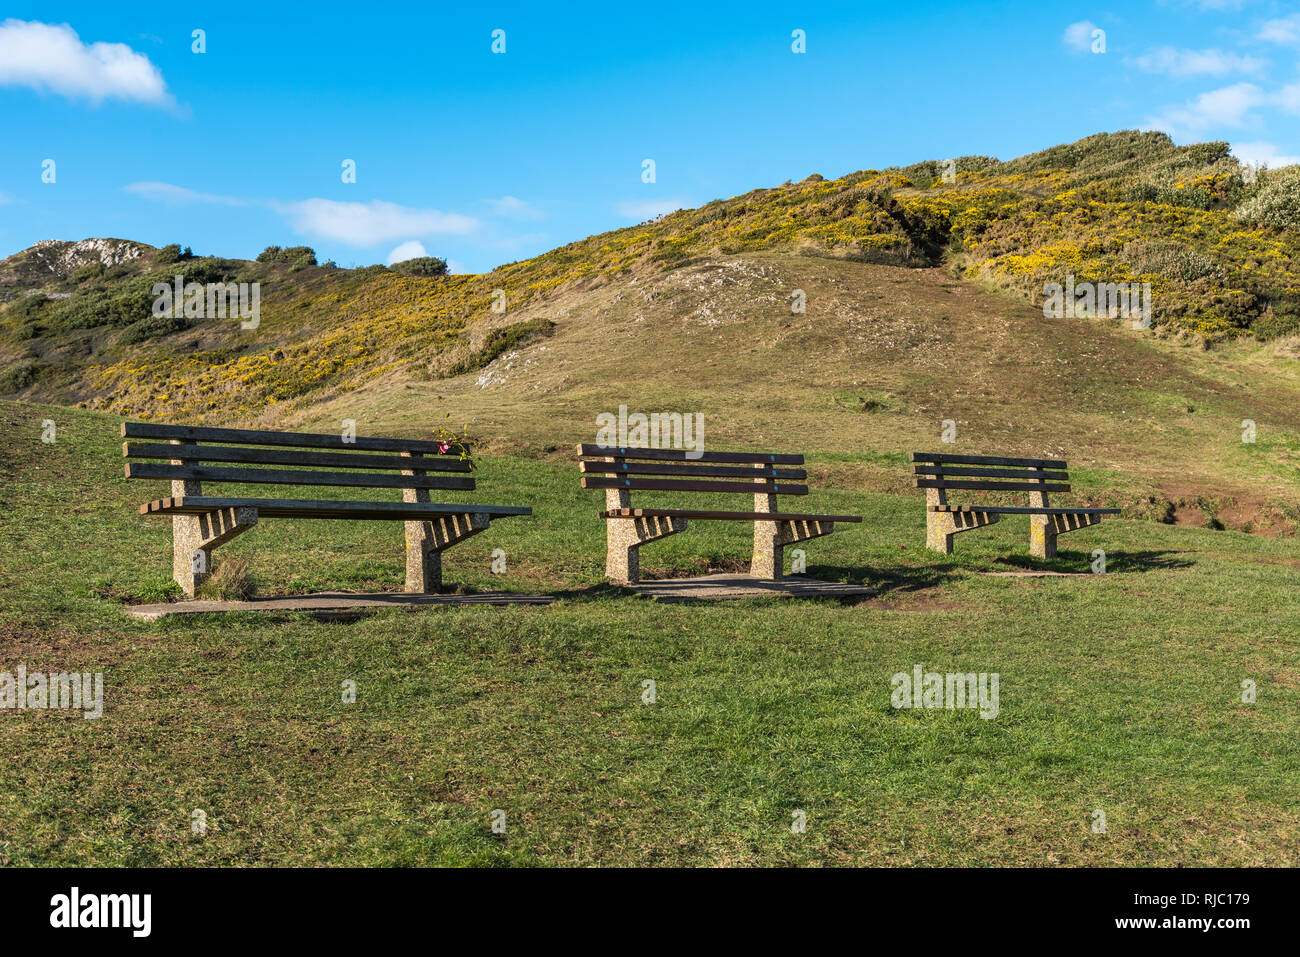 Three empty wooden benches in a row, positioned in front of a landscape of hills, with yellow flowers. Blue sky and clouds behind. With space for text. Stock Photo